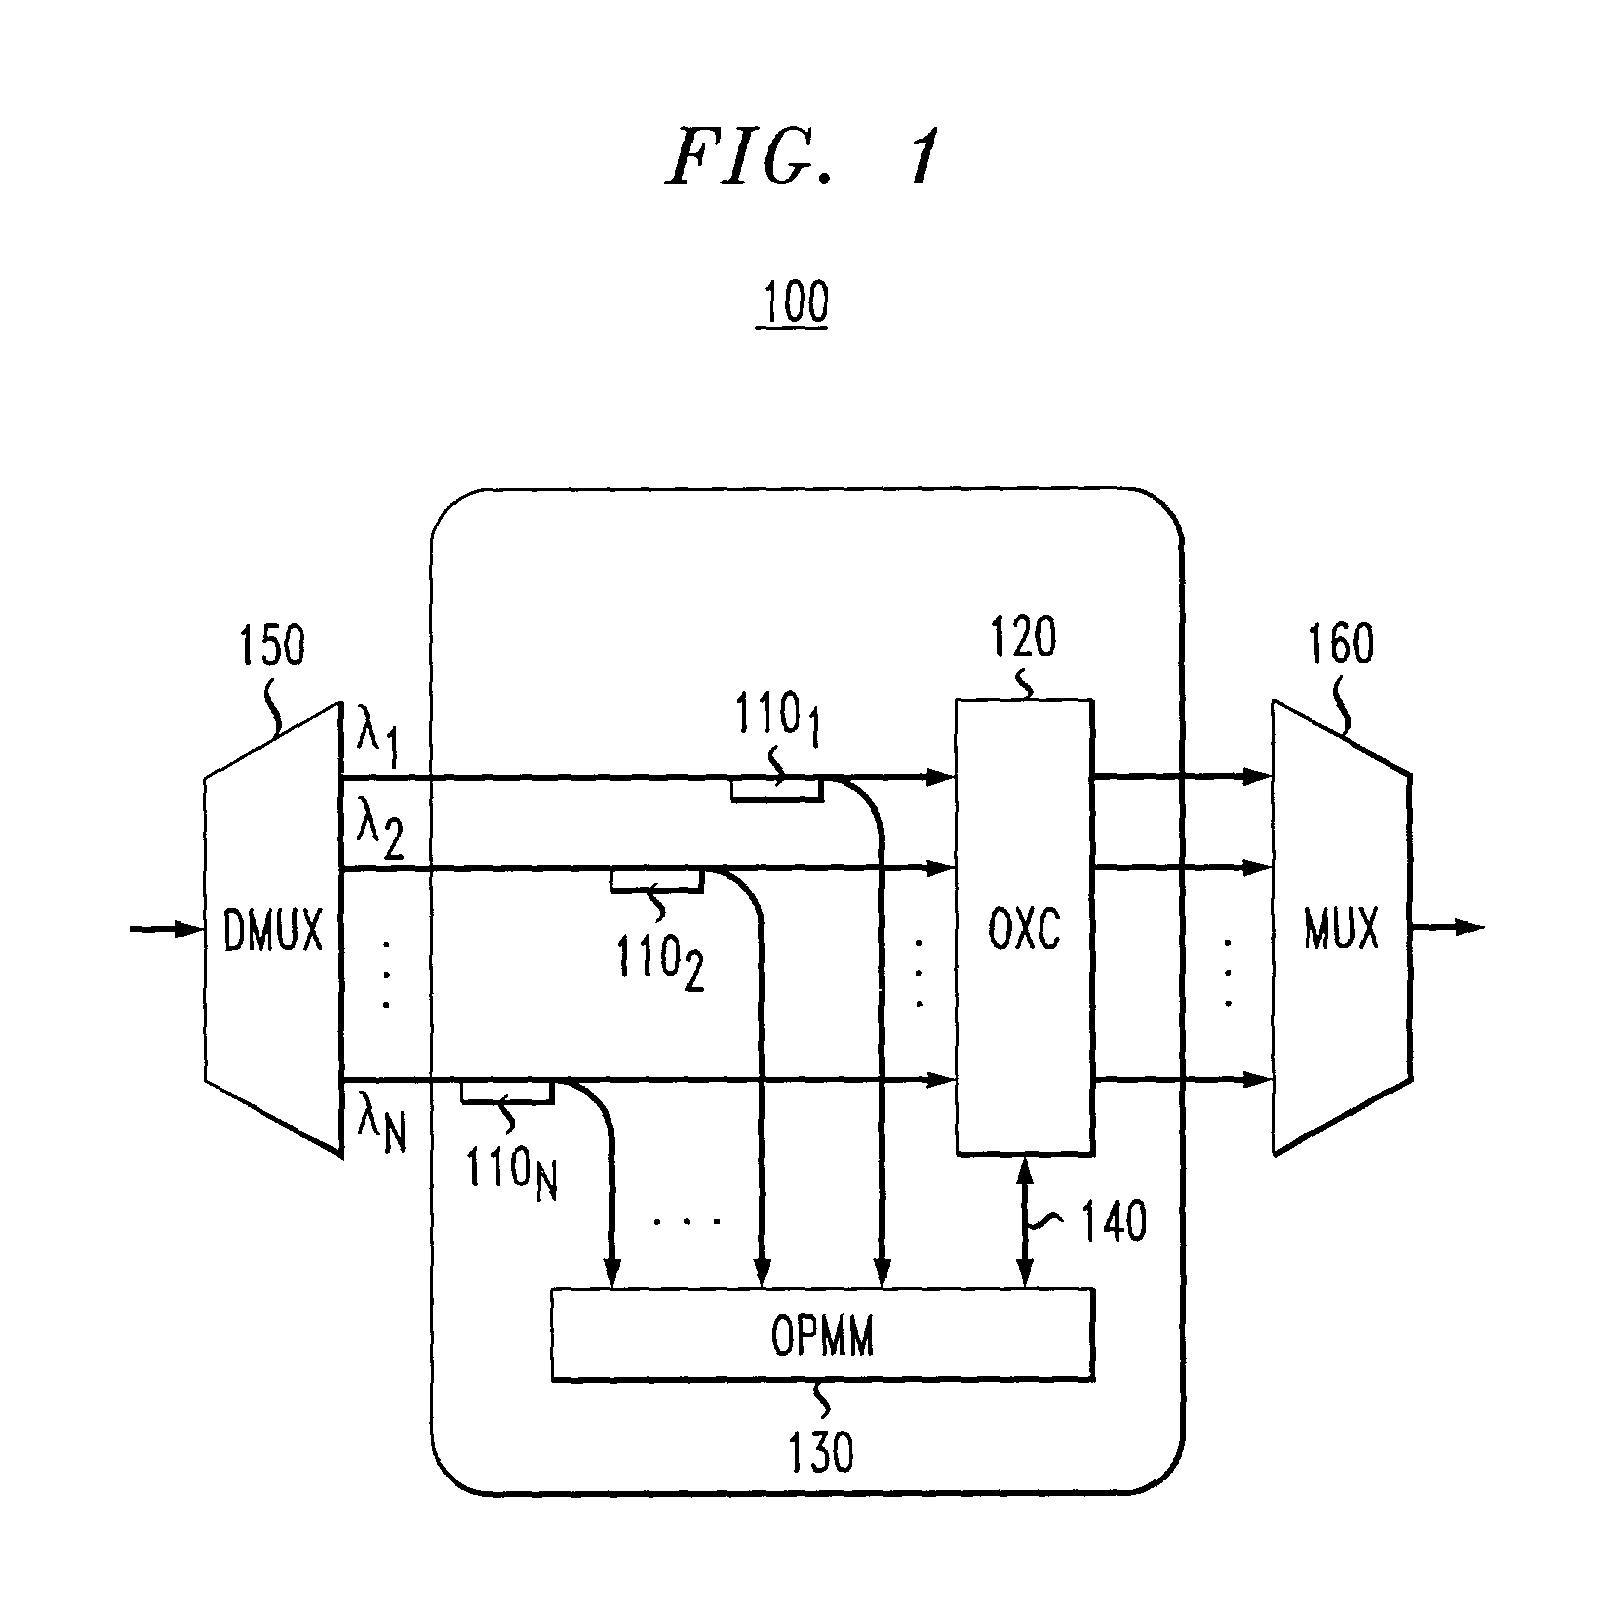 Method and apparatus for multi-protocol and multi-rate optical channel performance monitoring